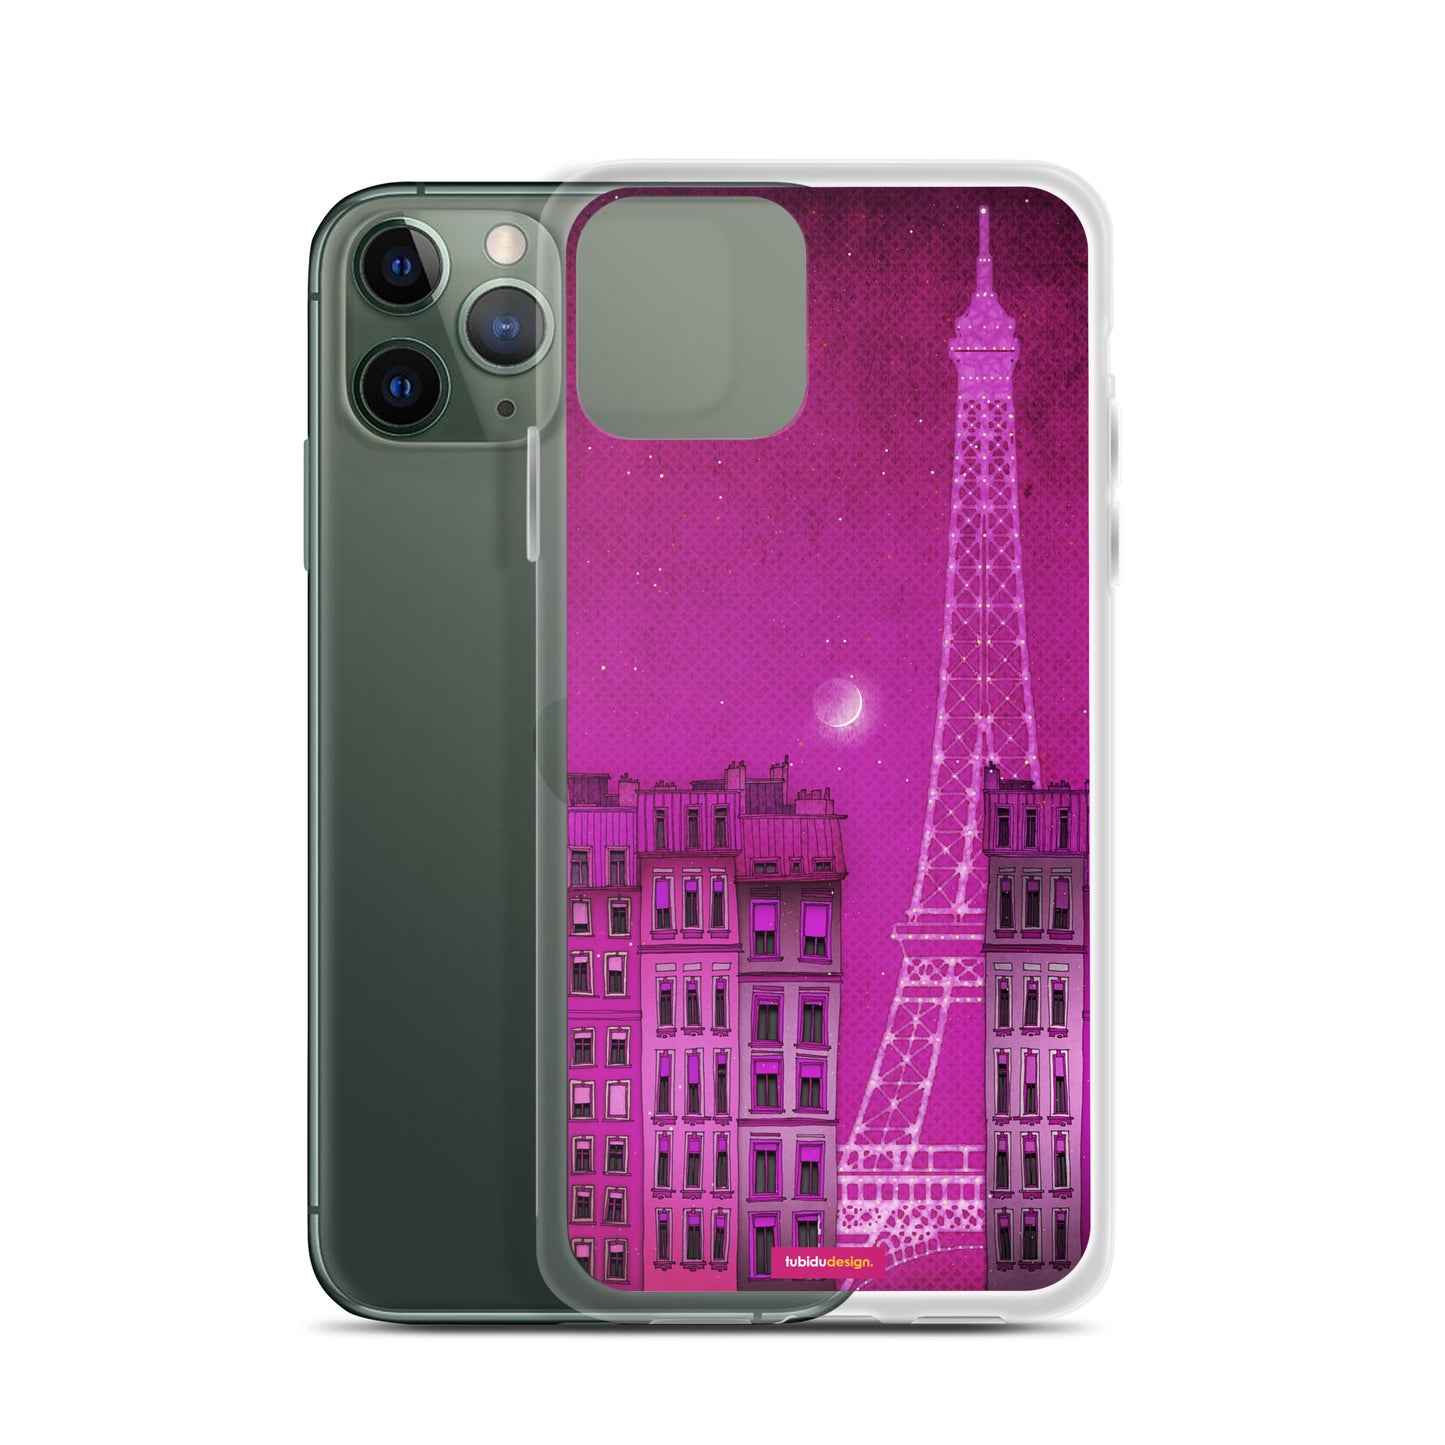 The lights of the Eiffel tower (pink) - Illustrated iPhone Case